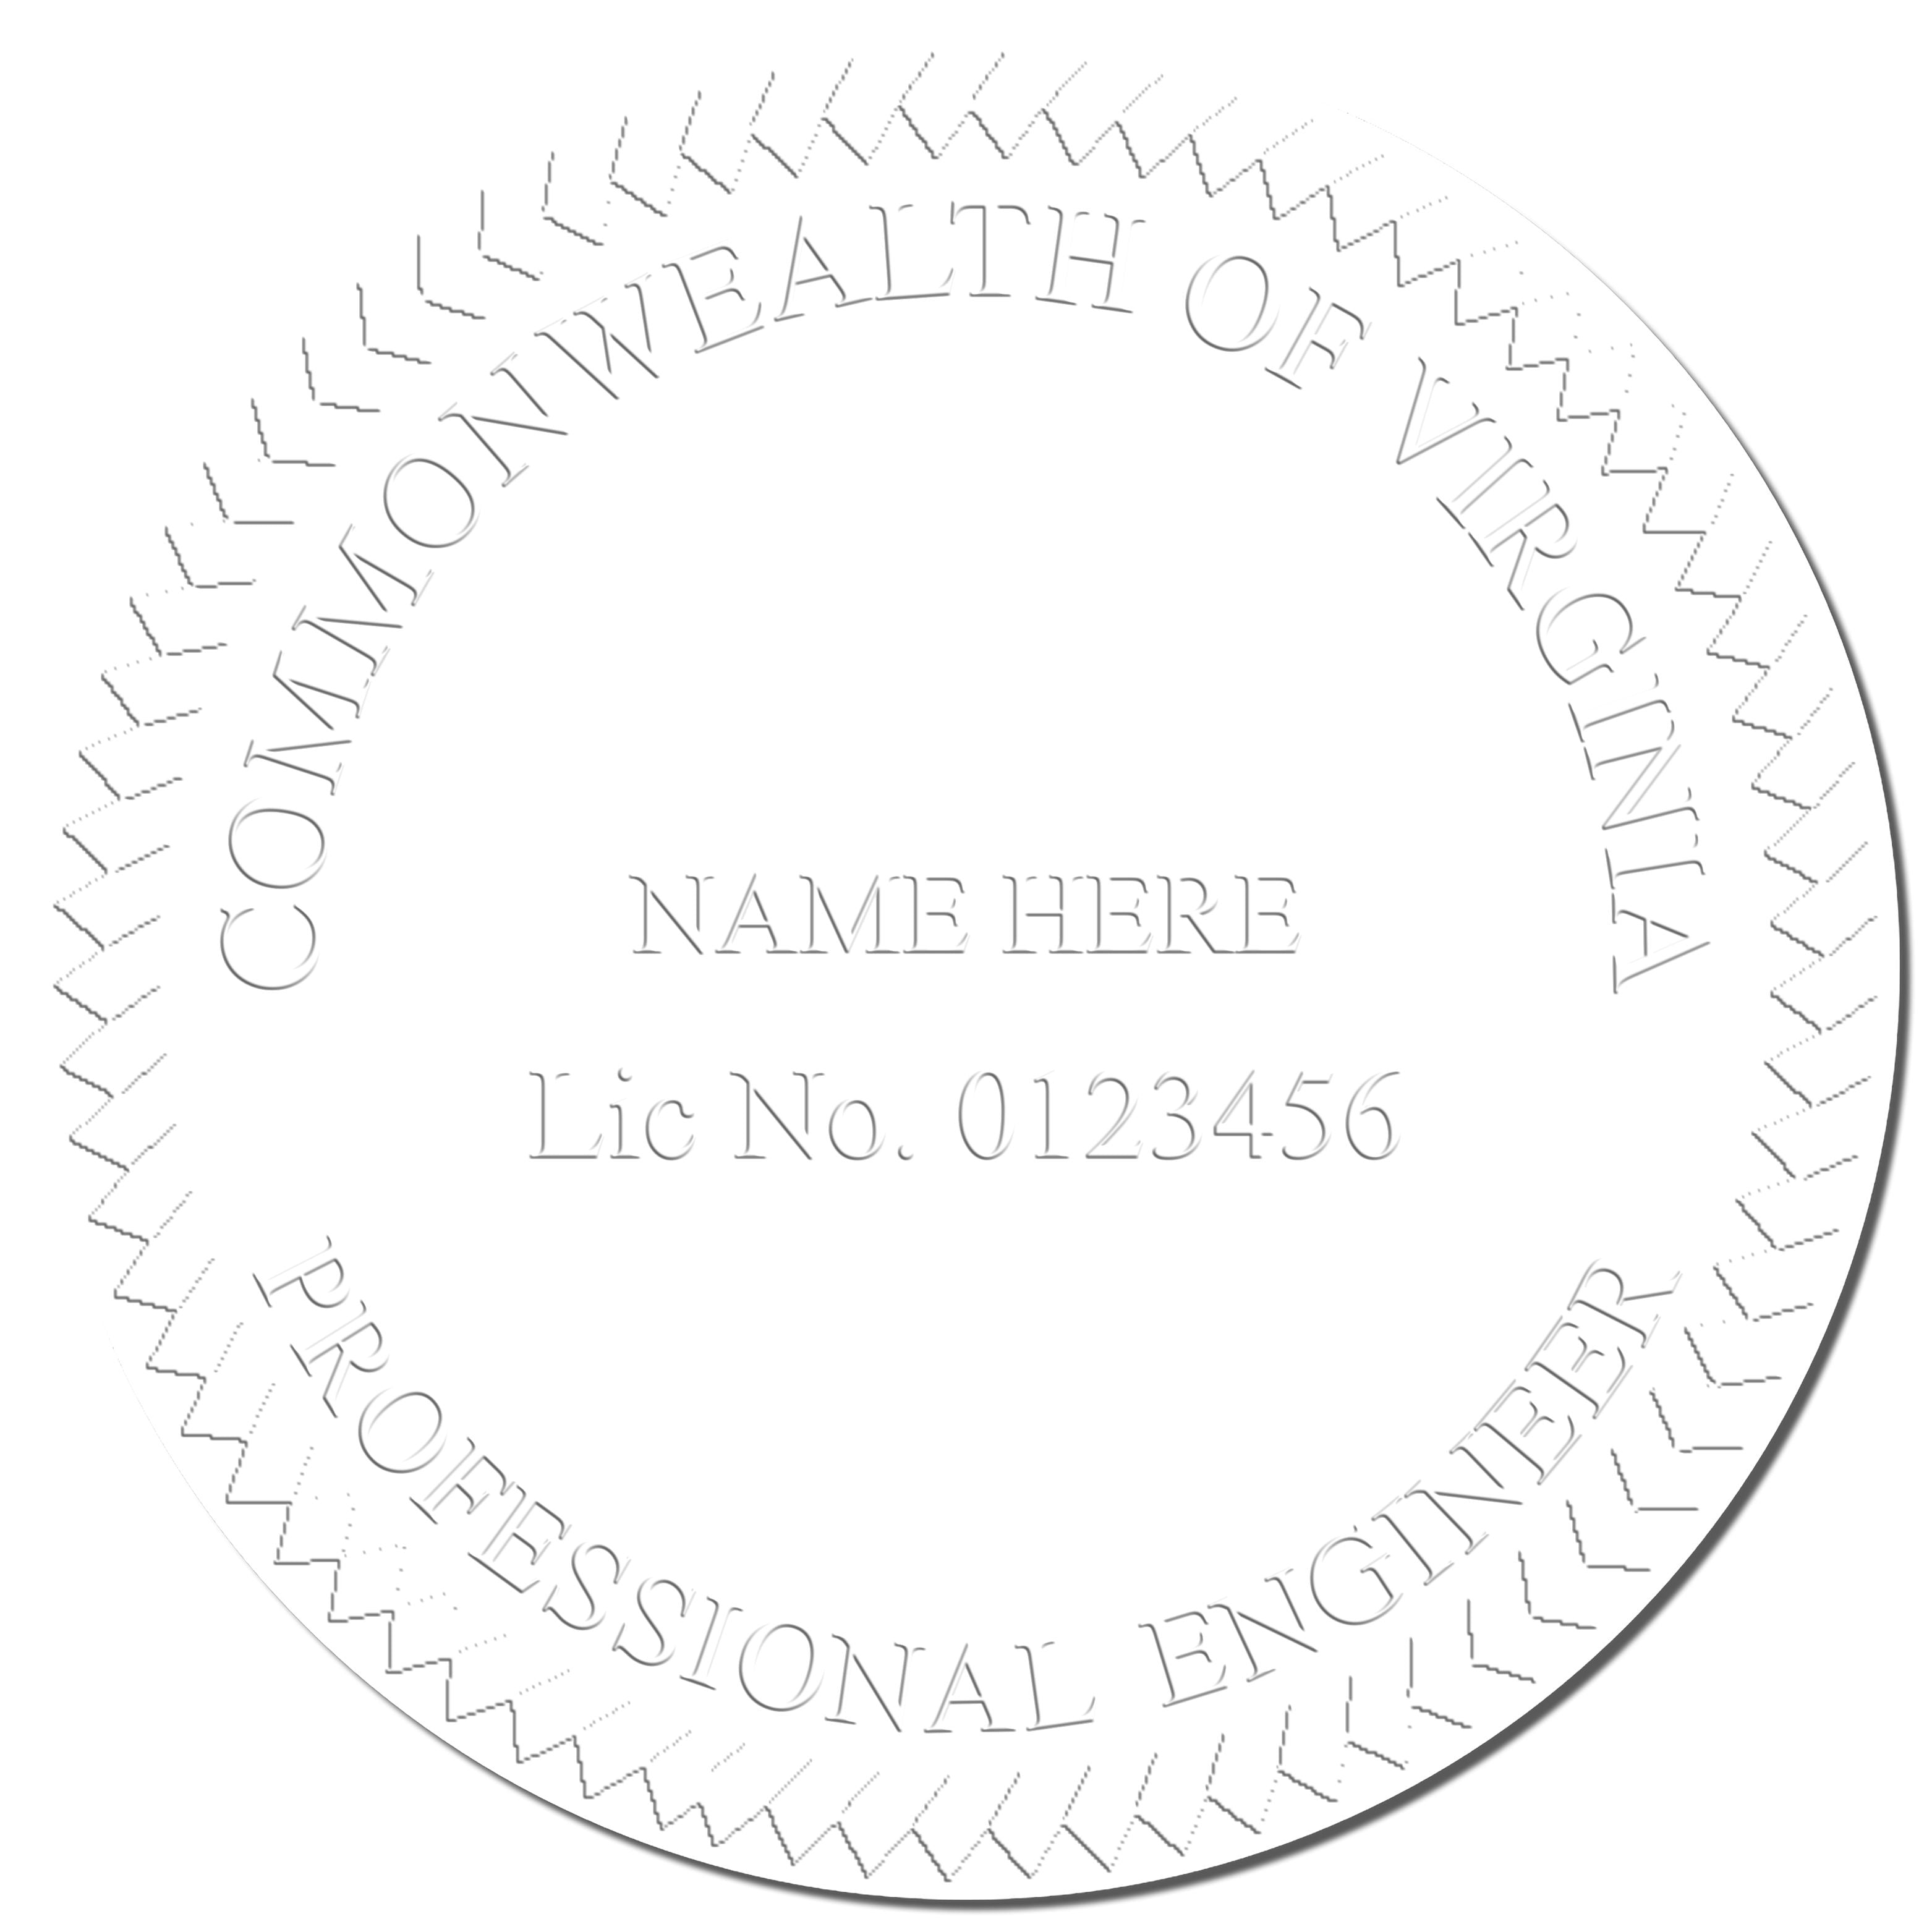 This paper is stamped with a sample imprint of the Gift Virginia Engineer Seal, signifying its quality and reliability.